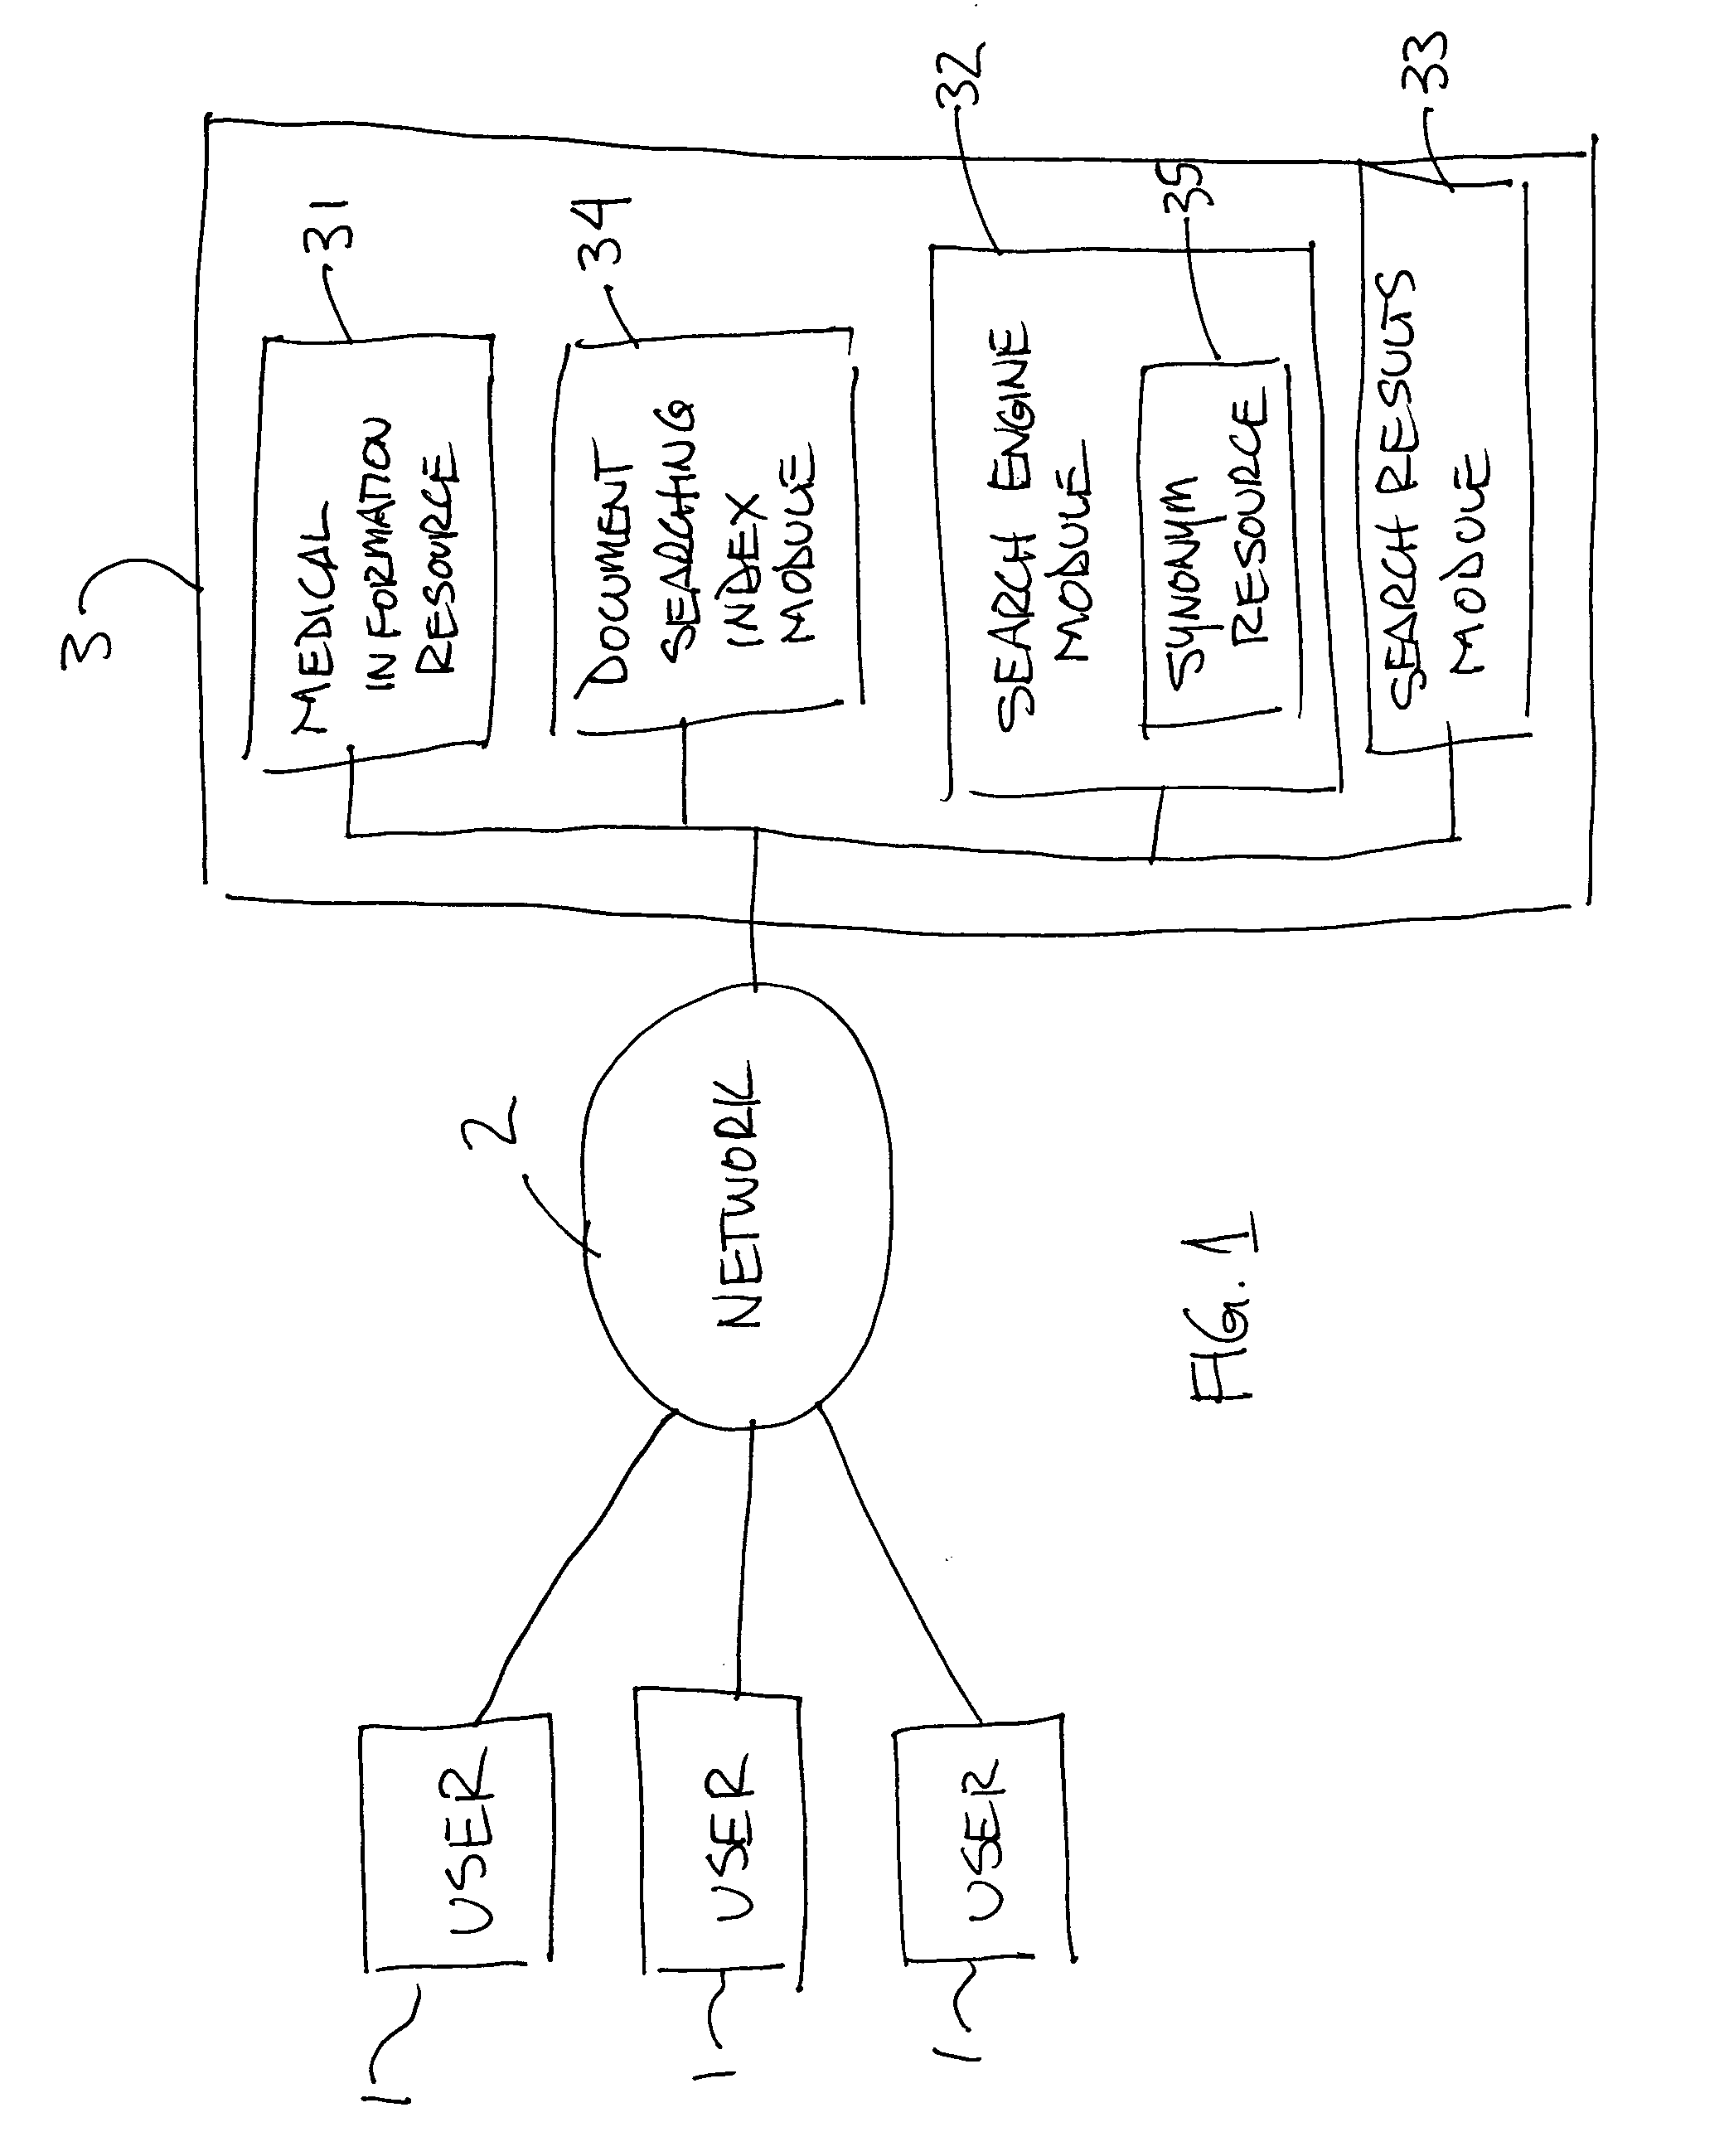 Method and apparatus for identifying documents relevant to a search query in a medical information resource